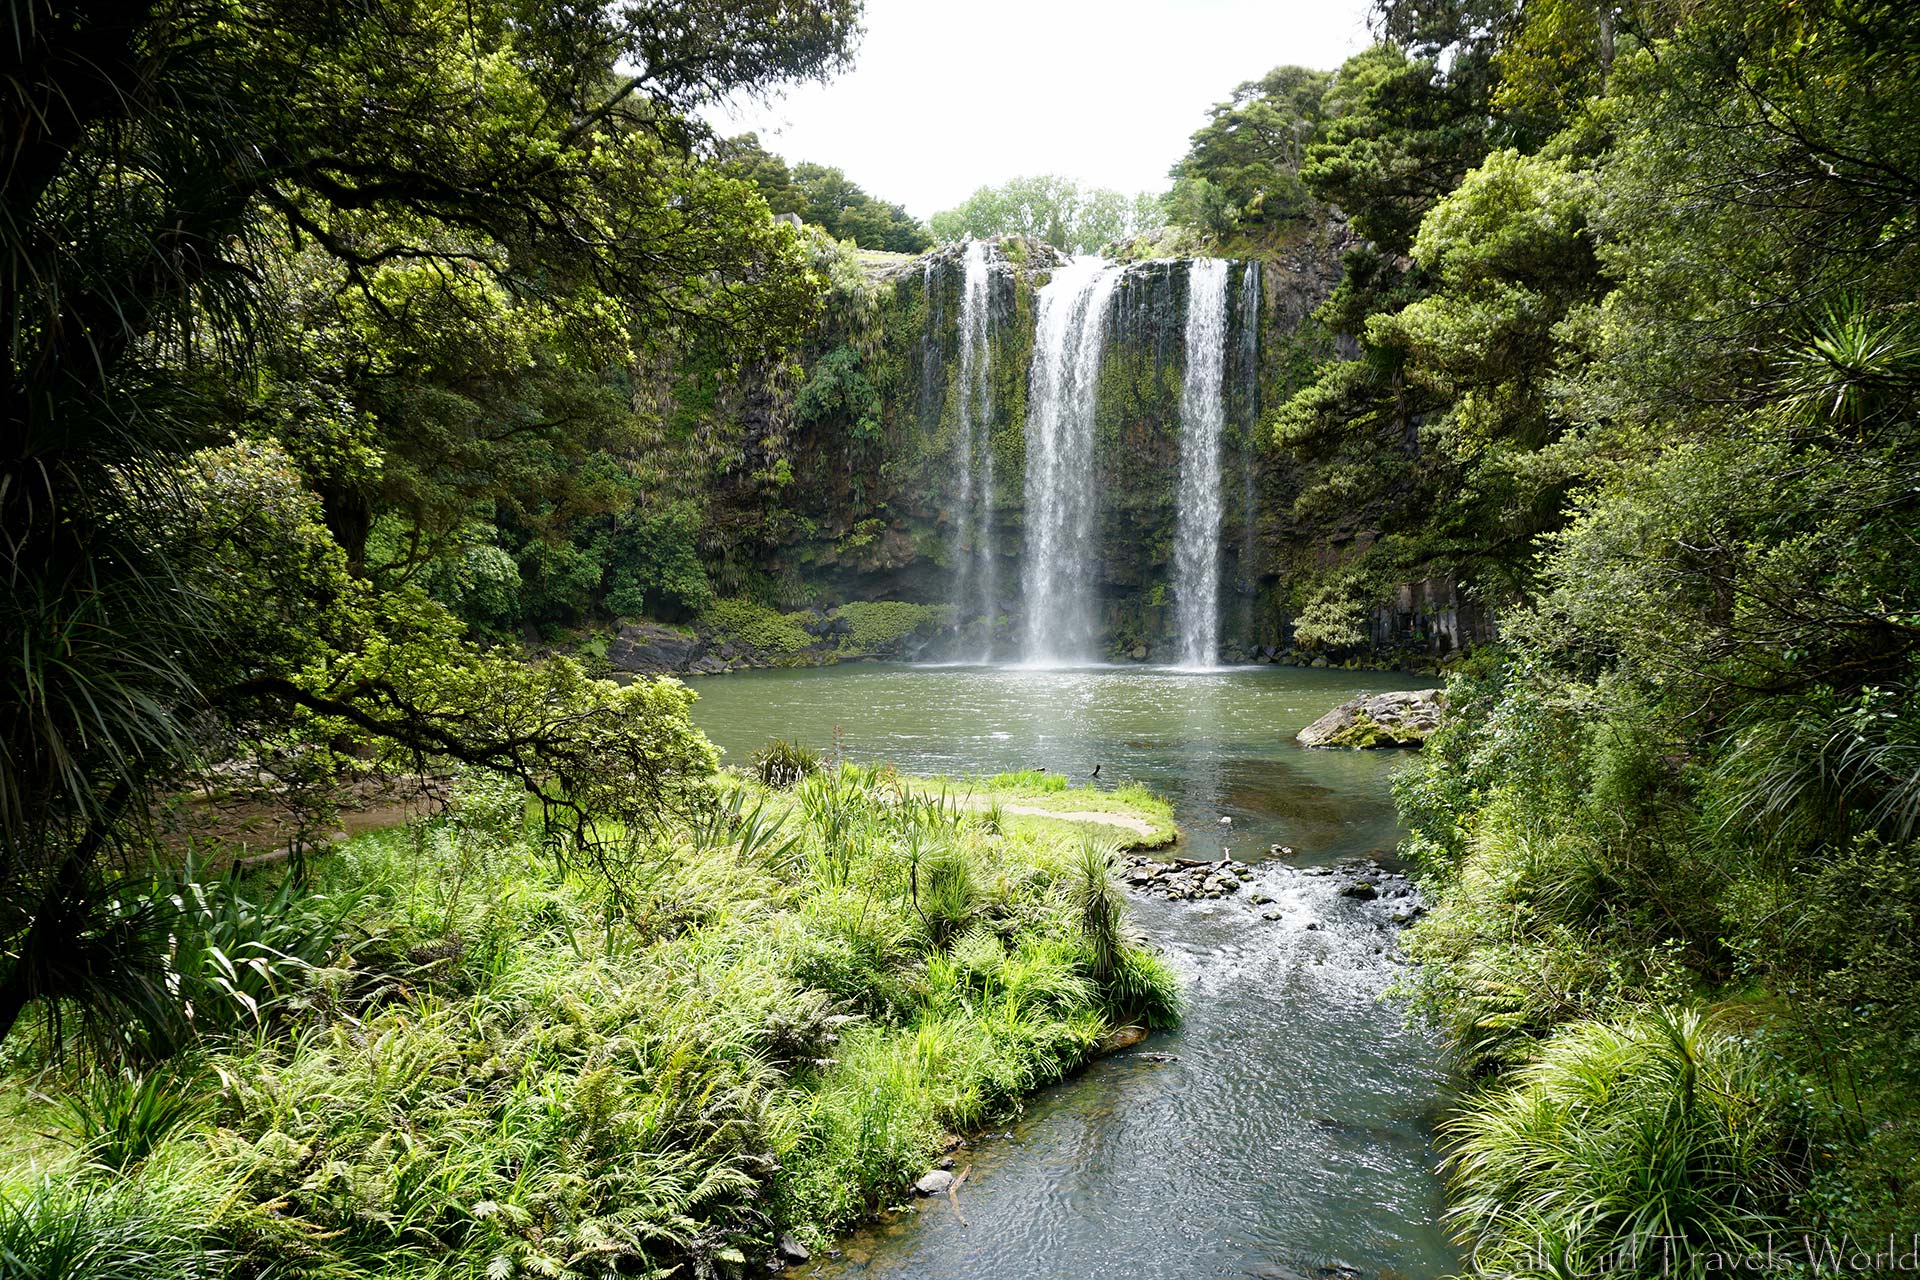 The perfect view of the Whangarei Waterfall in Northland, North Island, New Zealand.